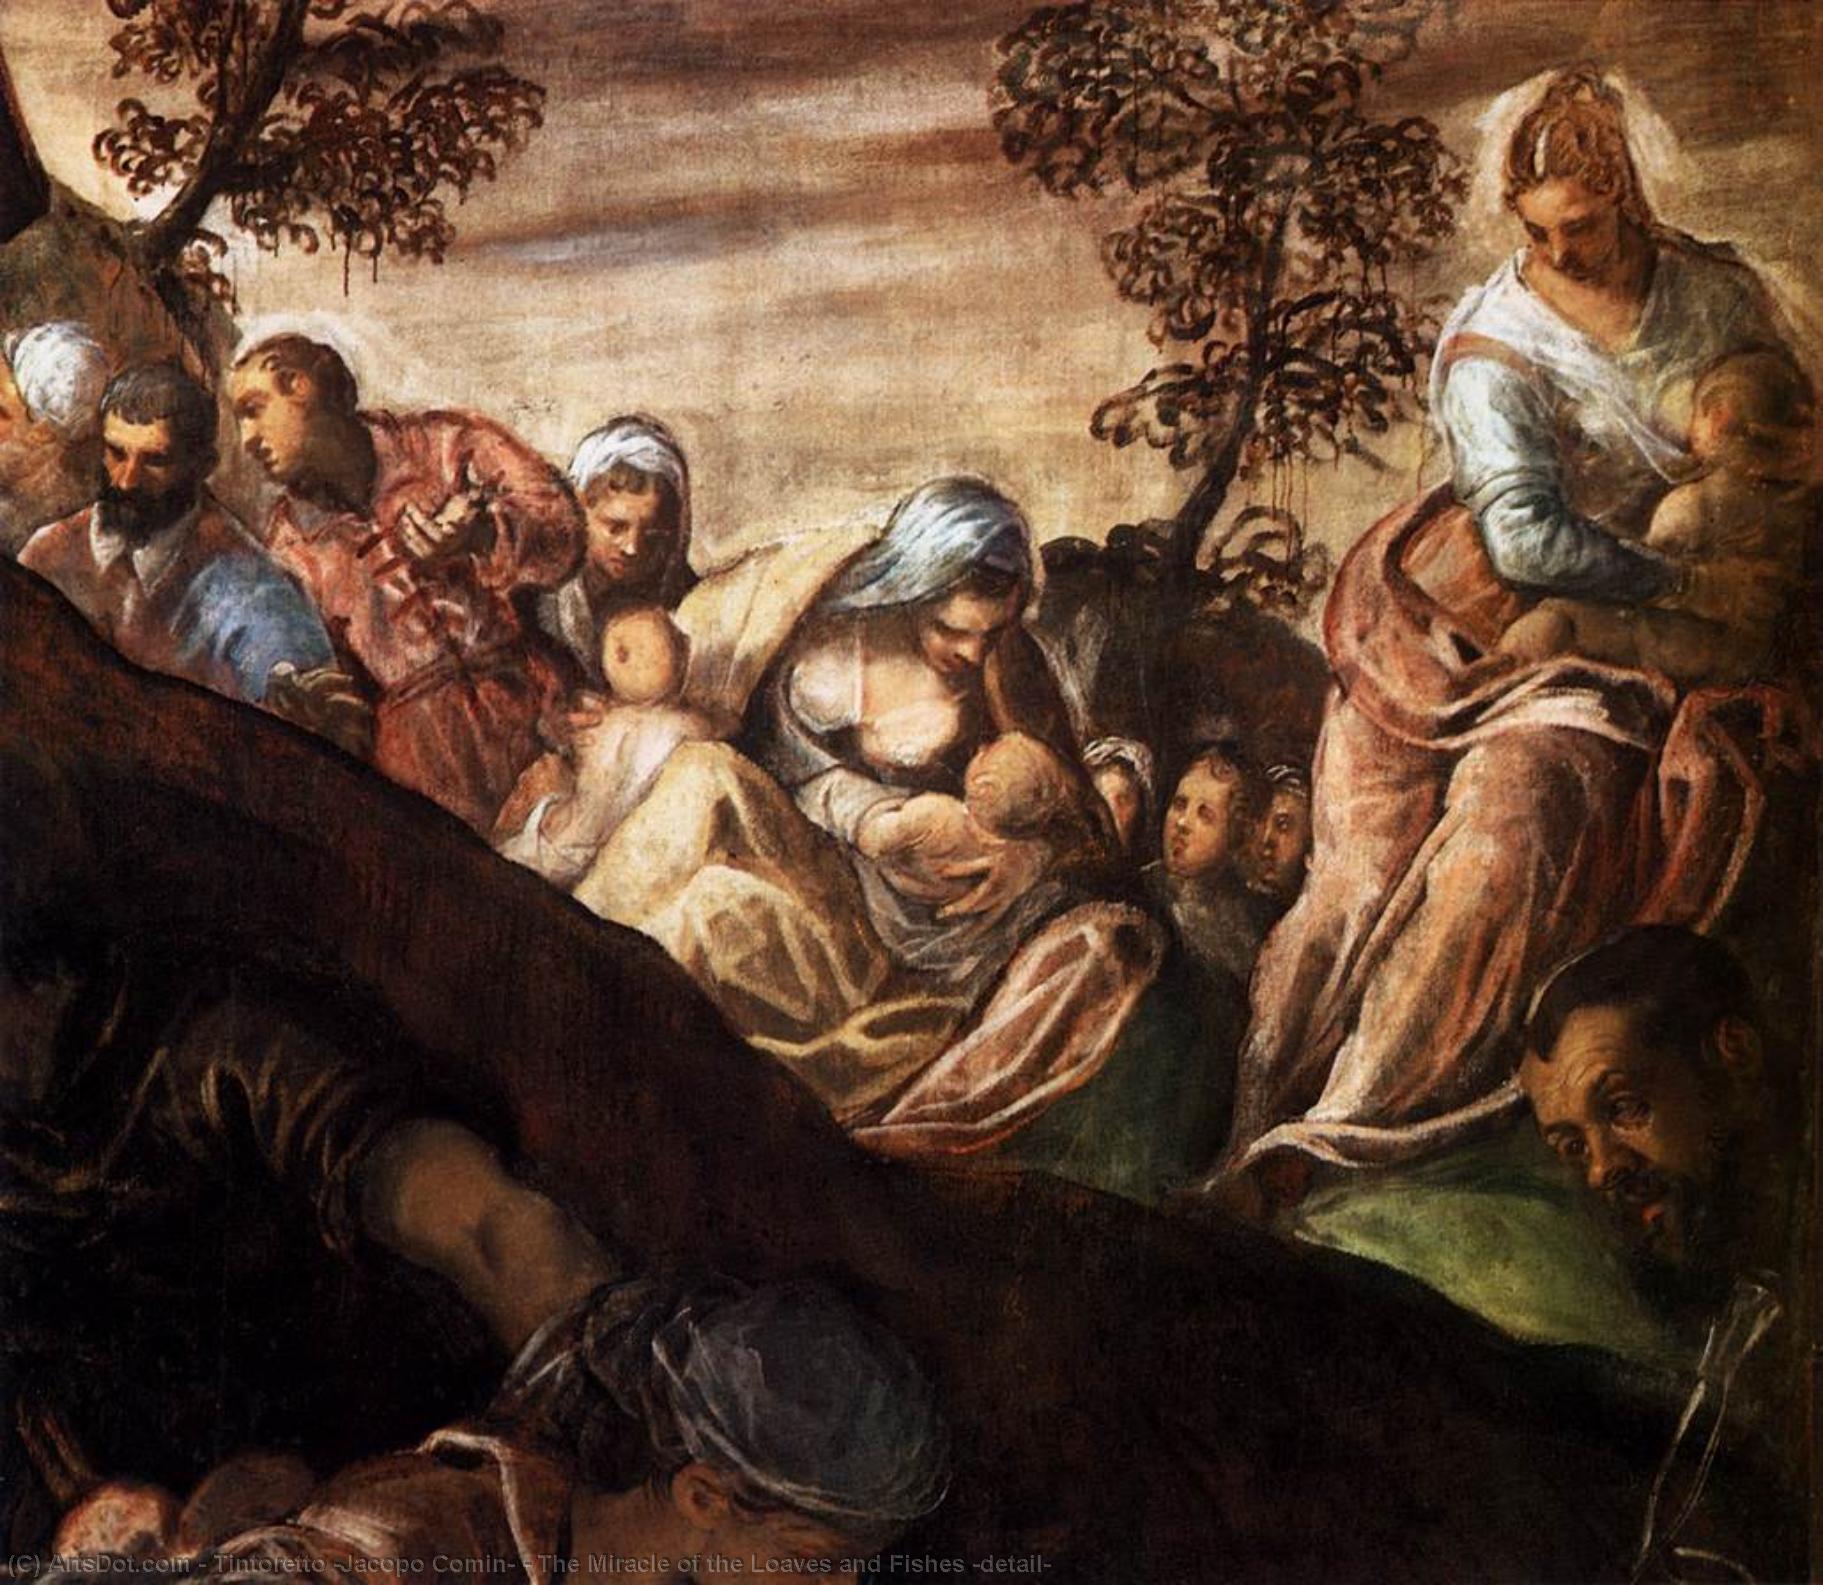 WikiOO.org - 백과 사전 - 회화, 삽화 Tintoretto (Jacopo Comin) - The Miracle of the Loaves and Fishes (detail)